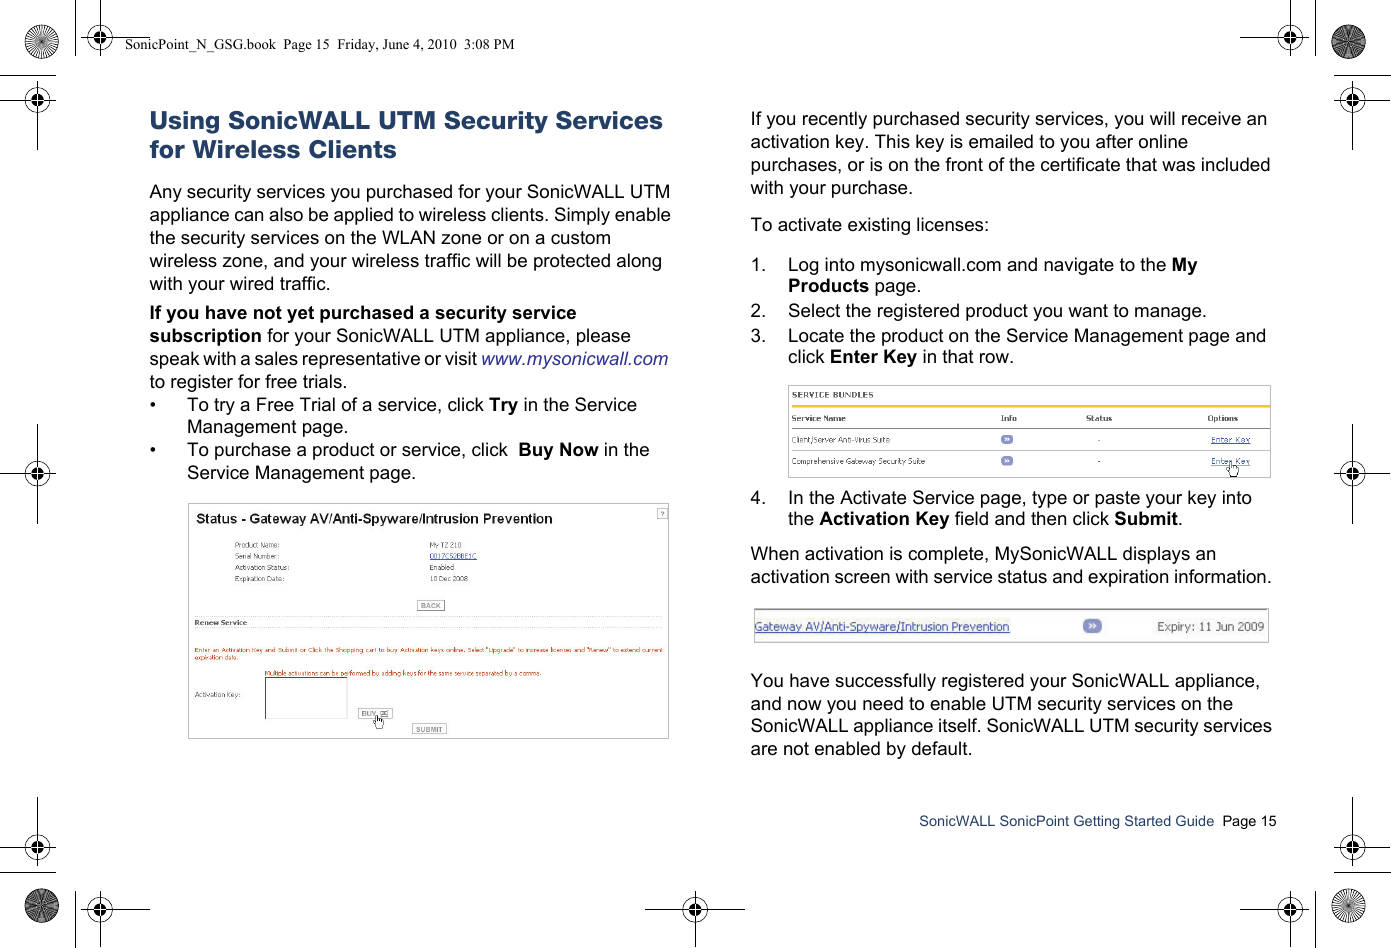 SonicWALL SonicPoint Getting Started Guide  Page 15Using SonicWALL UTM Security Services for Wireless ClientsAny security services you purchased for your SonicWALL UTM appliance can also be applied to wireless clients. Simply enable the security services on the WLAN zone or on a custom wireless zone, and your wireless traffic will be protected along with your wired traffic. If you have not yet purchased a security service subscription for your SonicWALL UTM appliance, please speak with a sales representative or visit www.mysonicwall.com  to register for free trials.• To try a Free Trial of a service, click Try in the Service Management page.• To purchase a product or service, click  Buy Now in the Service Management page.If you recently purchased security services, you will receive an activation key. This key is emailed to you after online purchases, or is on the front of the certificate that was included with your purchase. To activate existing licenses:1. Log into mysonicwall.com and navigate to the My Products page.2. Select the registered product you want to manage. 3. Locate the product on the Service Management page and click Enter Key in that row.4. In the Activate Service page, type or paste your key into the Activation Key field and then click Submit. When activation is complete, MySonicWALL displays an activation screen with service status and expiration information. You have successfully registered your SonicWALL appliance, and now you need to enable UTM security services on the SonicWALL appliance itself. SonicWALL UTM security services are not enabled by default.SonicPoint_N_GSG.book  Page 15  Friday, June 4, 2010  3:08 PM